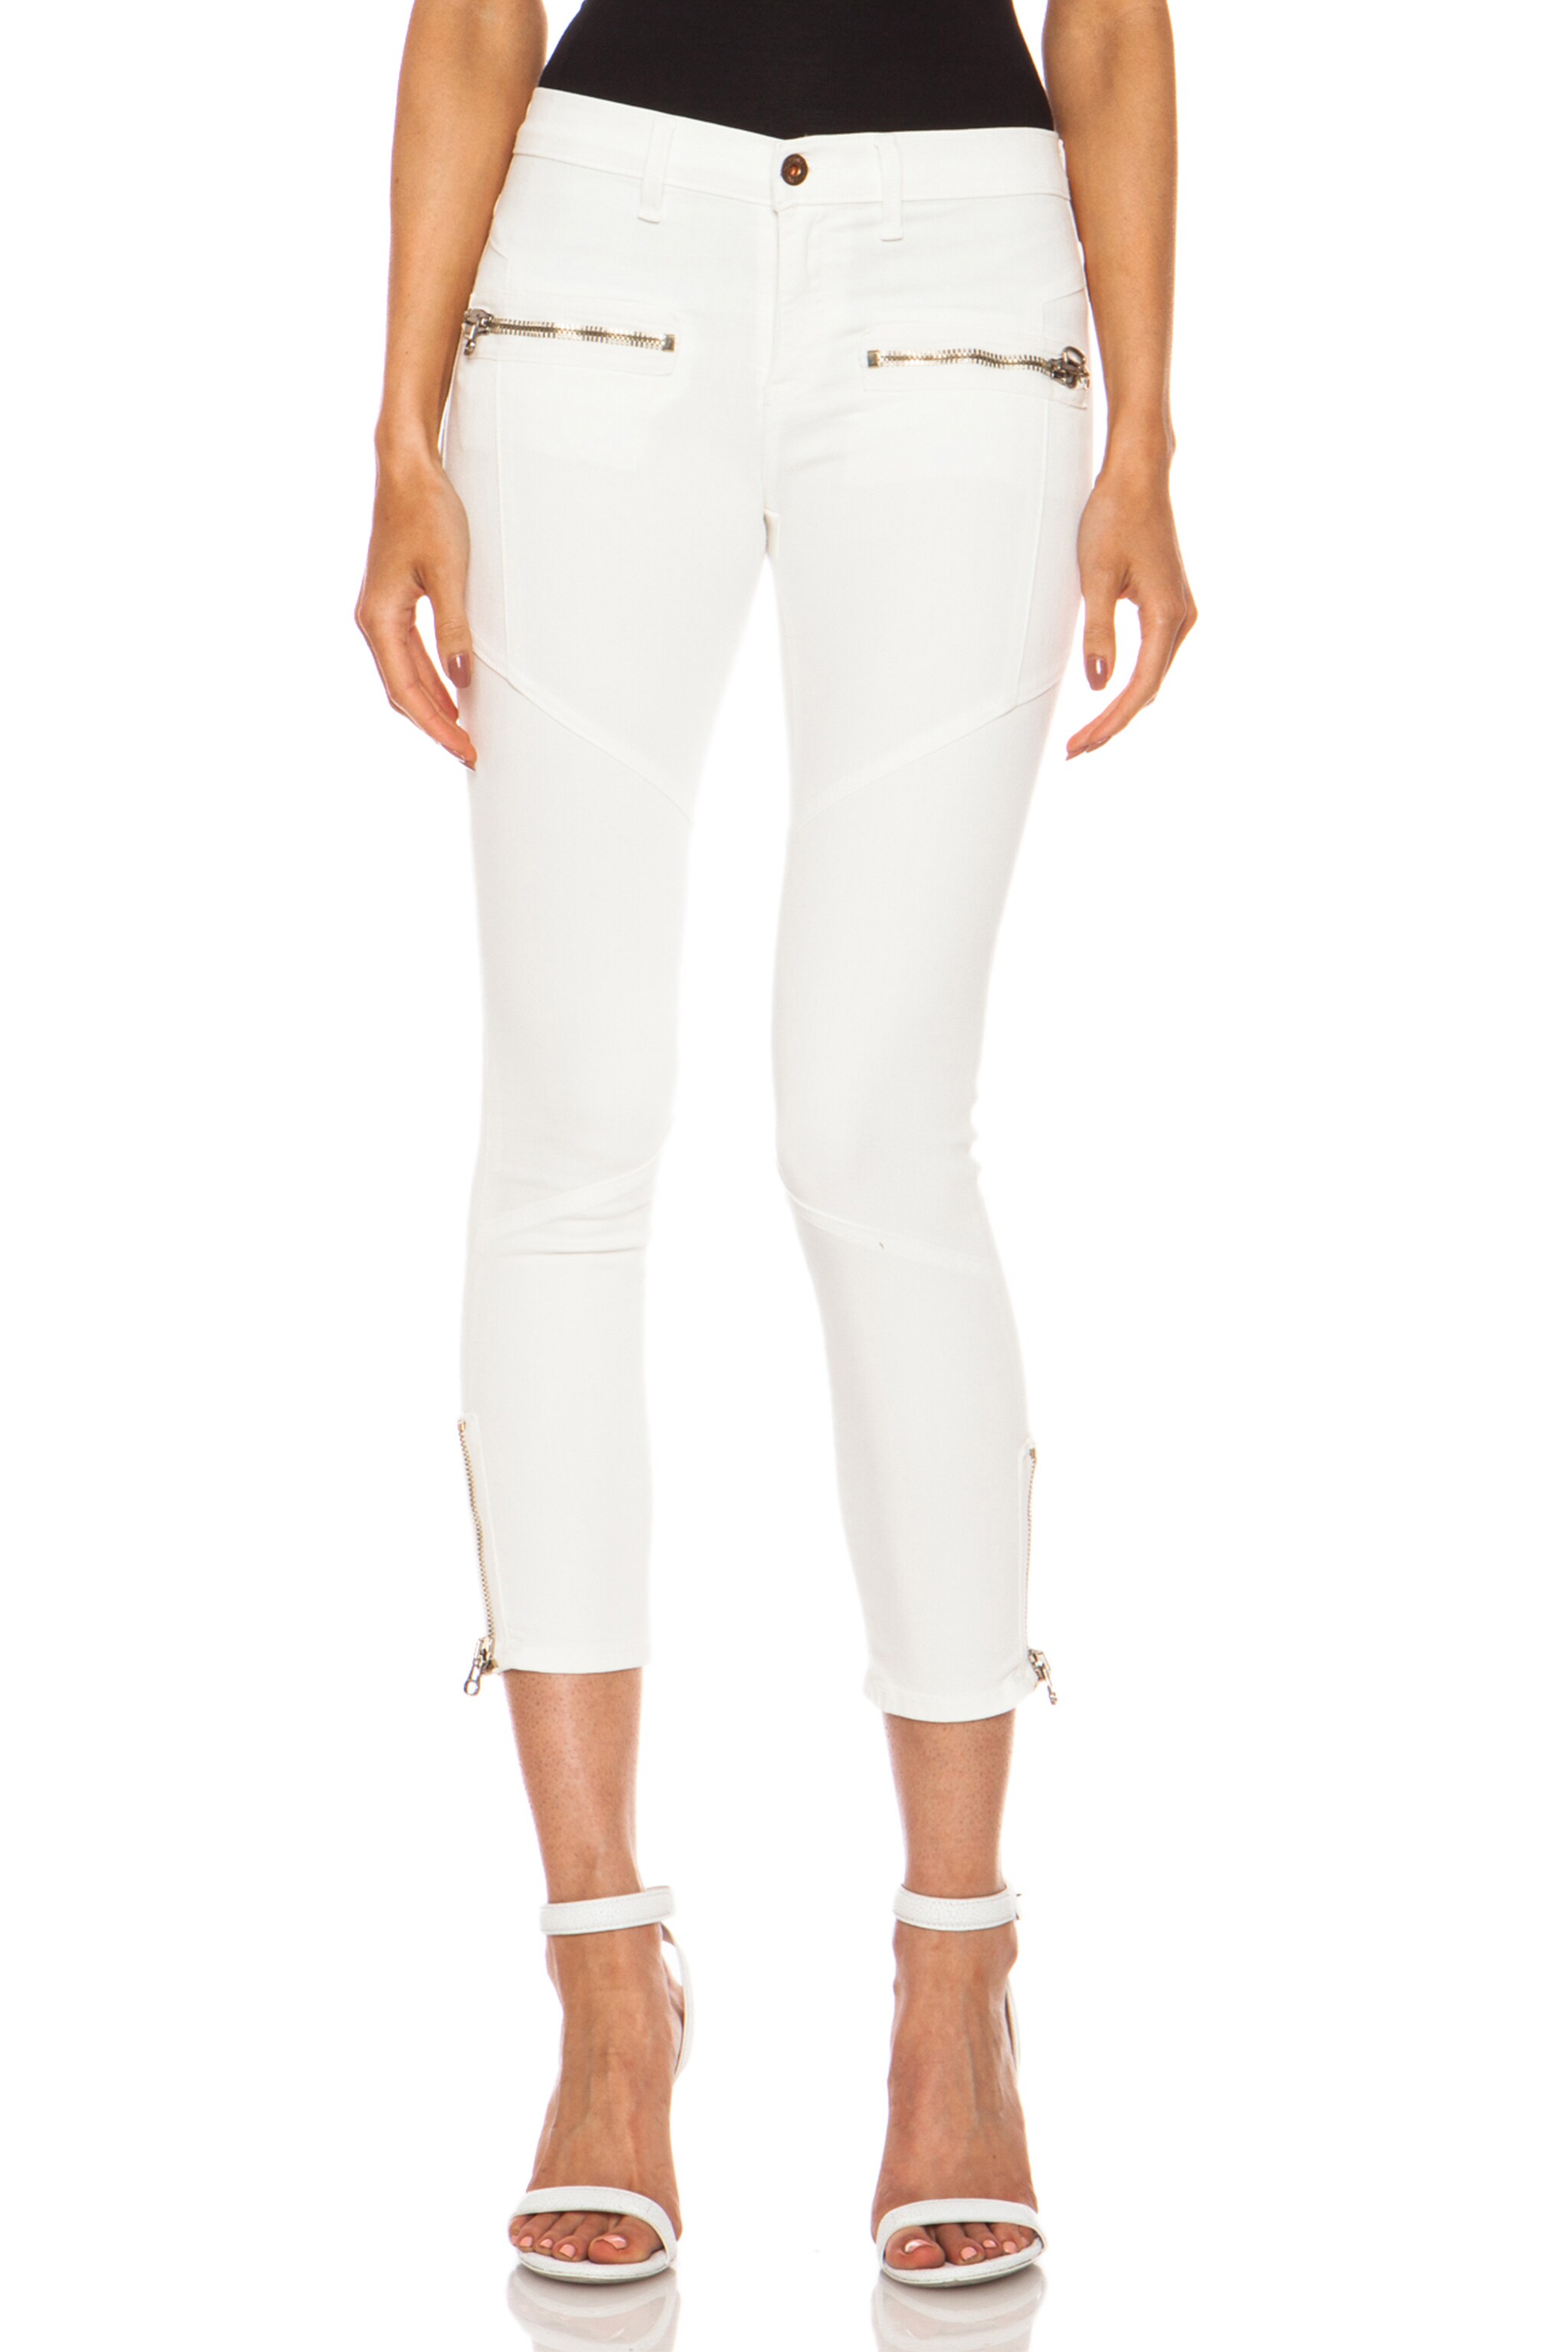 Image 1 of NSF Shay Cotton-Blend Pant in Ivory